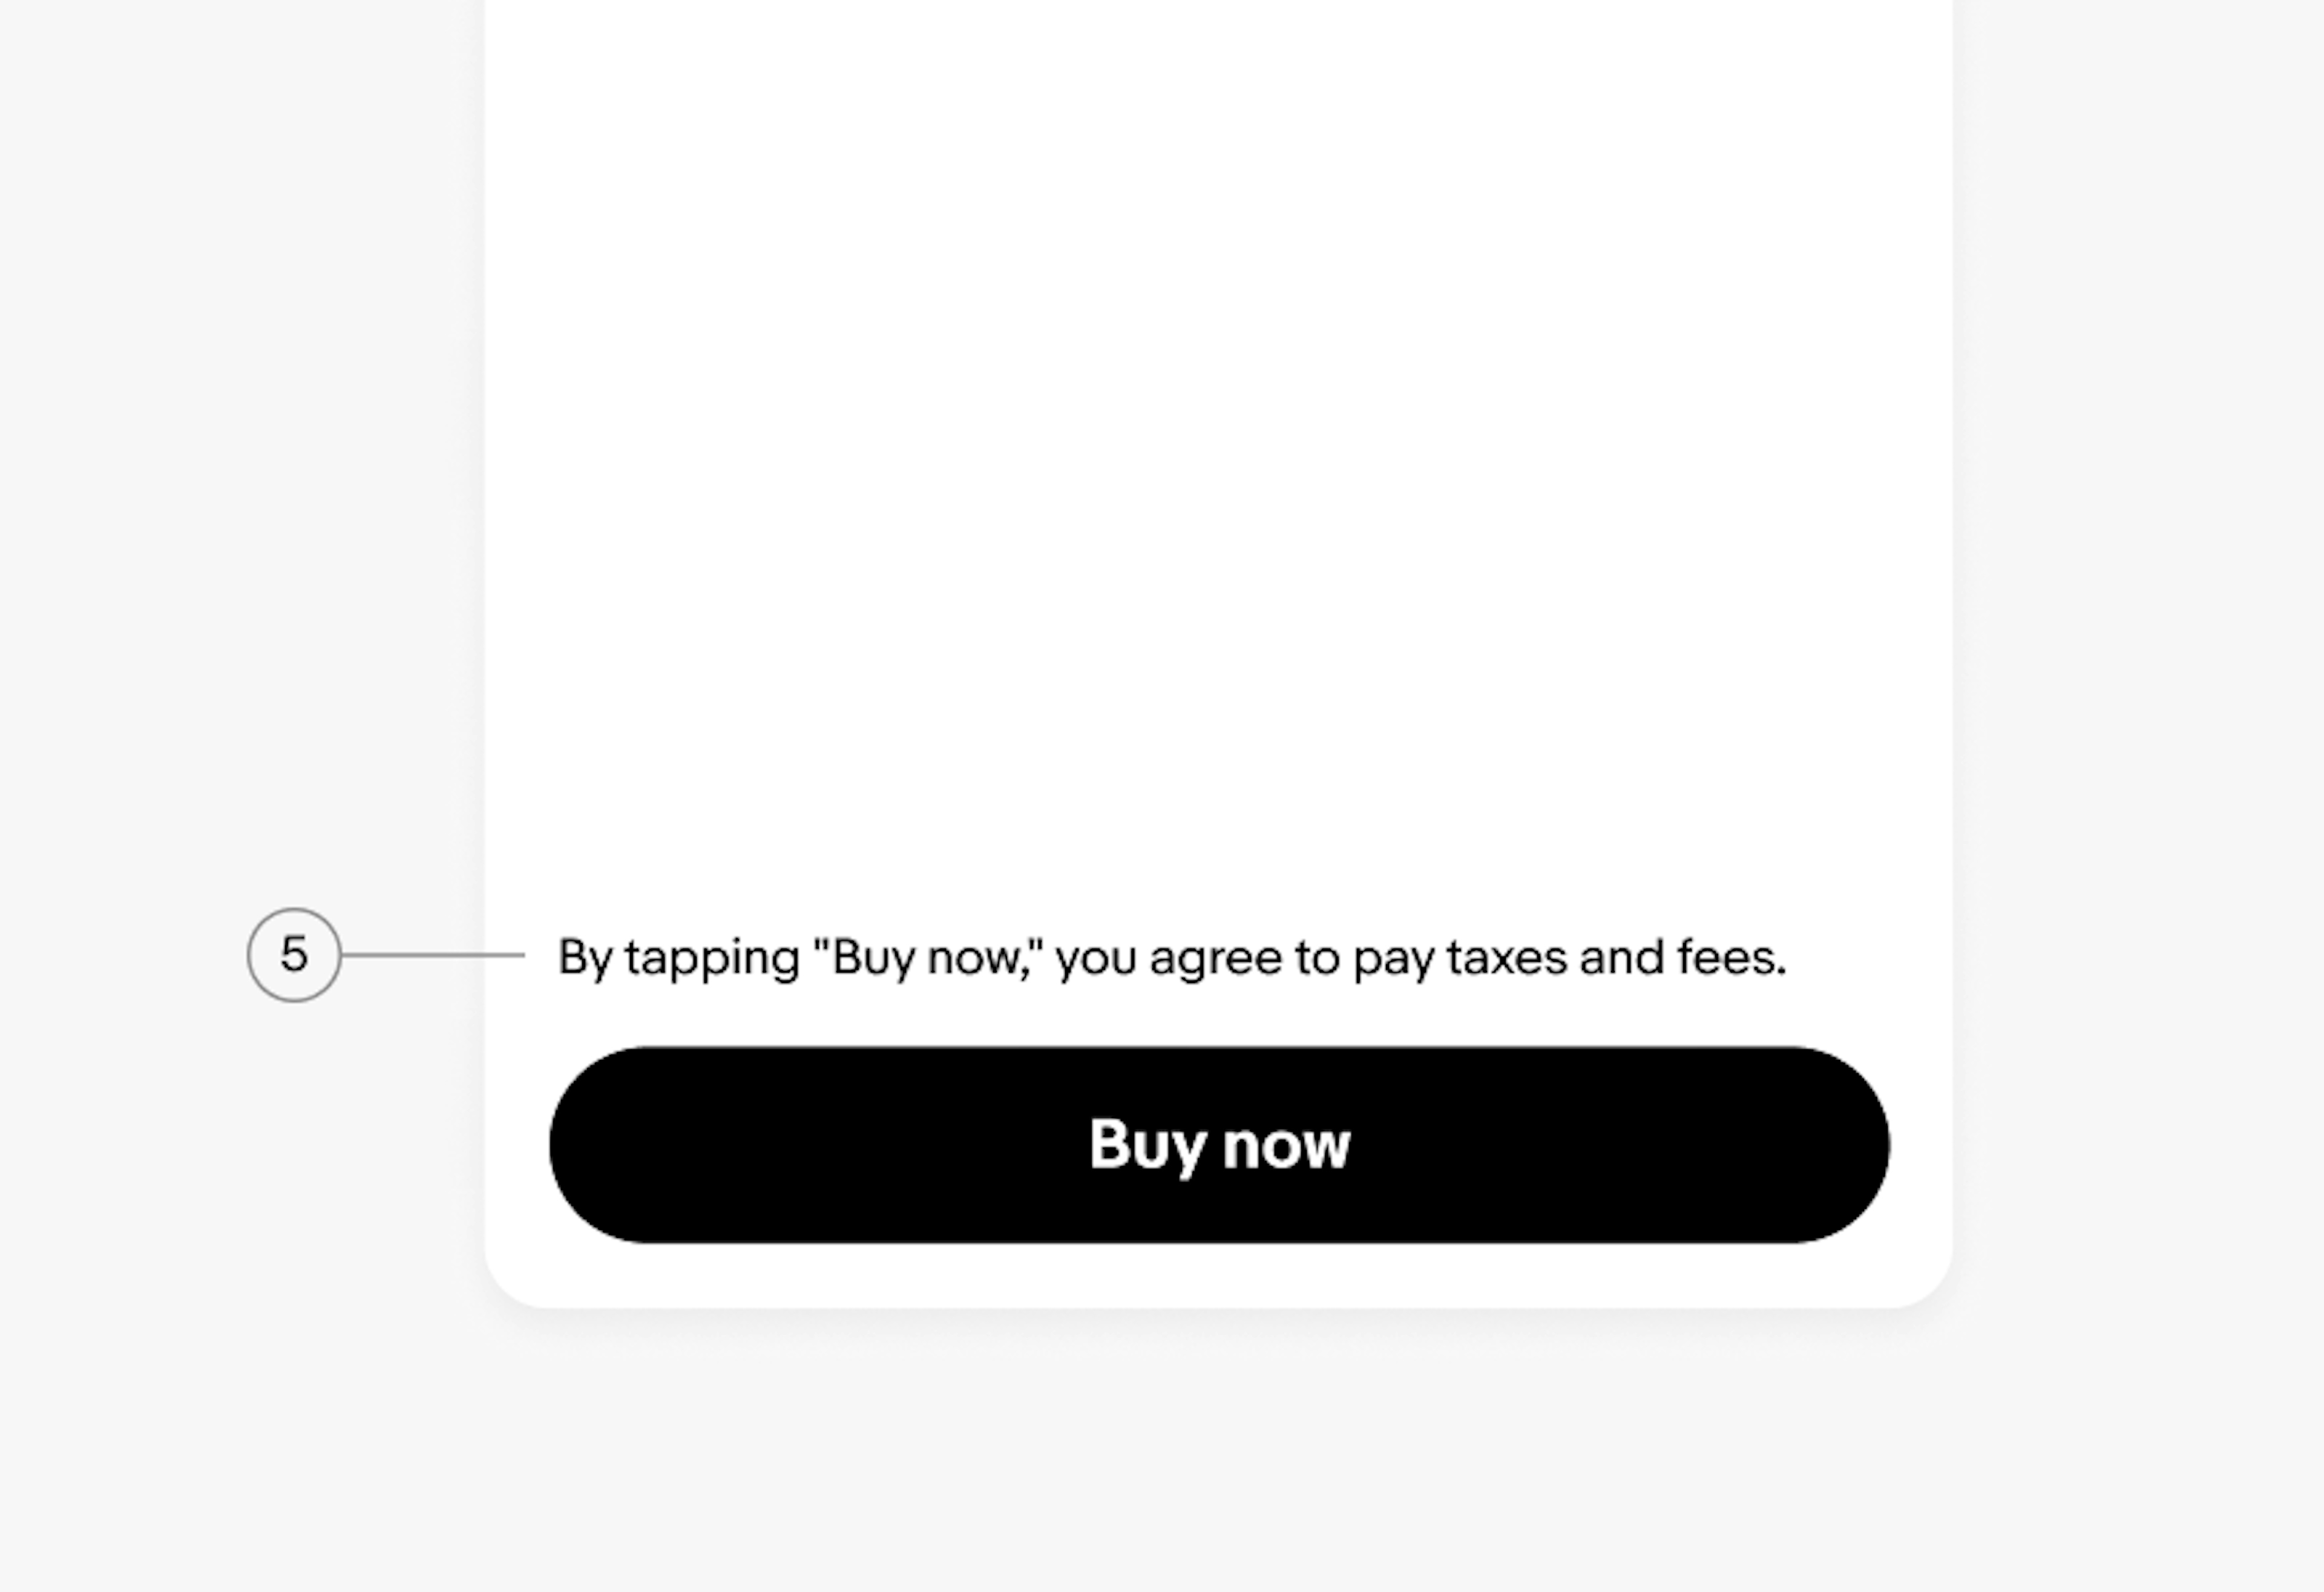 The caption “By tapping "Buy now," you agree to pay taxes and fees.” highlighted with the number 5.